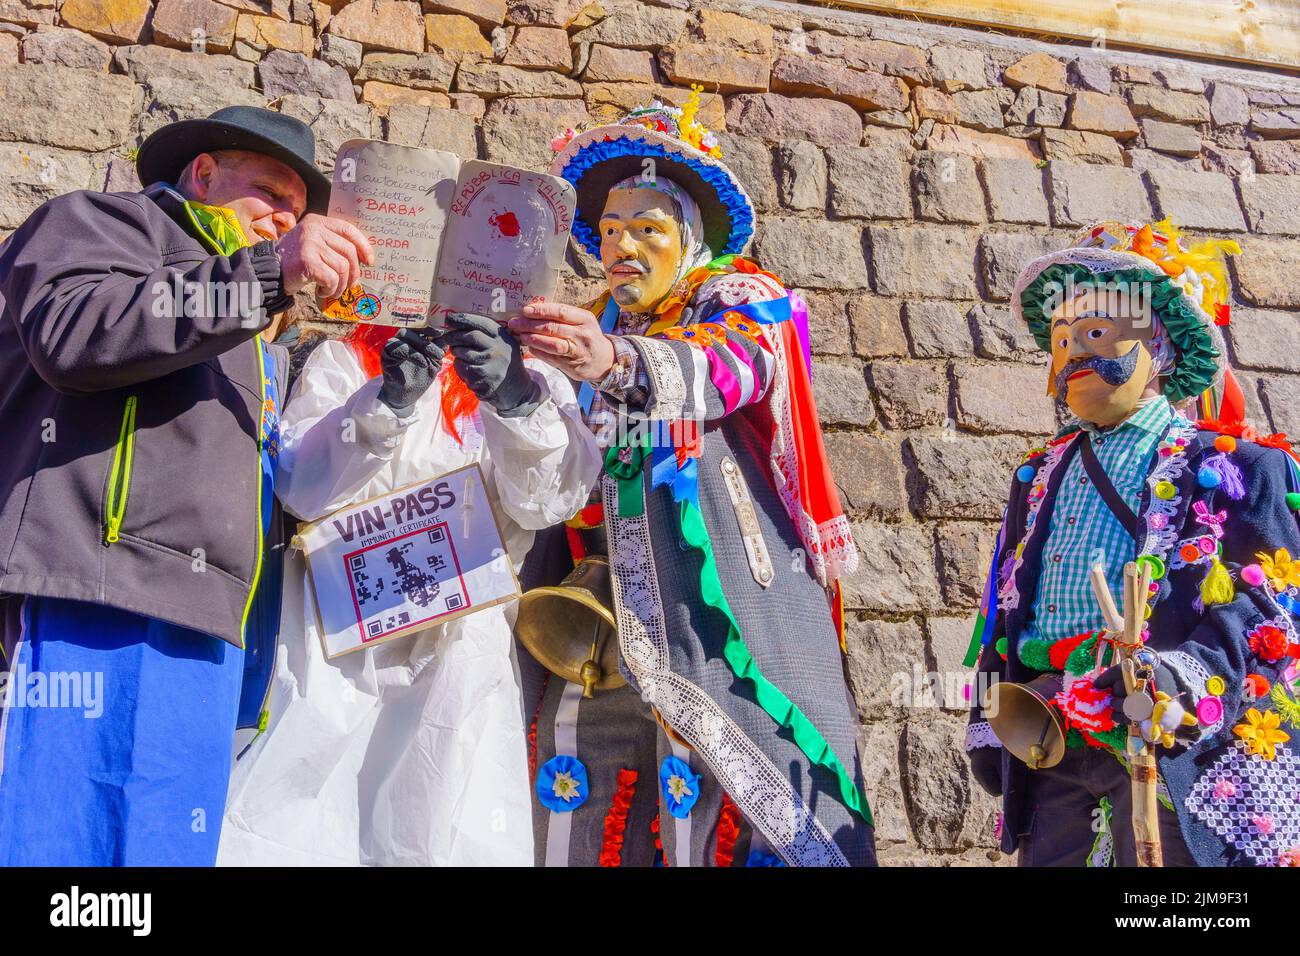 Valfloriana, Italy - February 26, 2022: Youth born in 2004 celebrate reaching legal drinking age (wine pass), in the Valfloriana 2022 carnival, Trenti Stock Photo